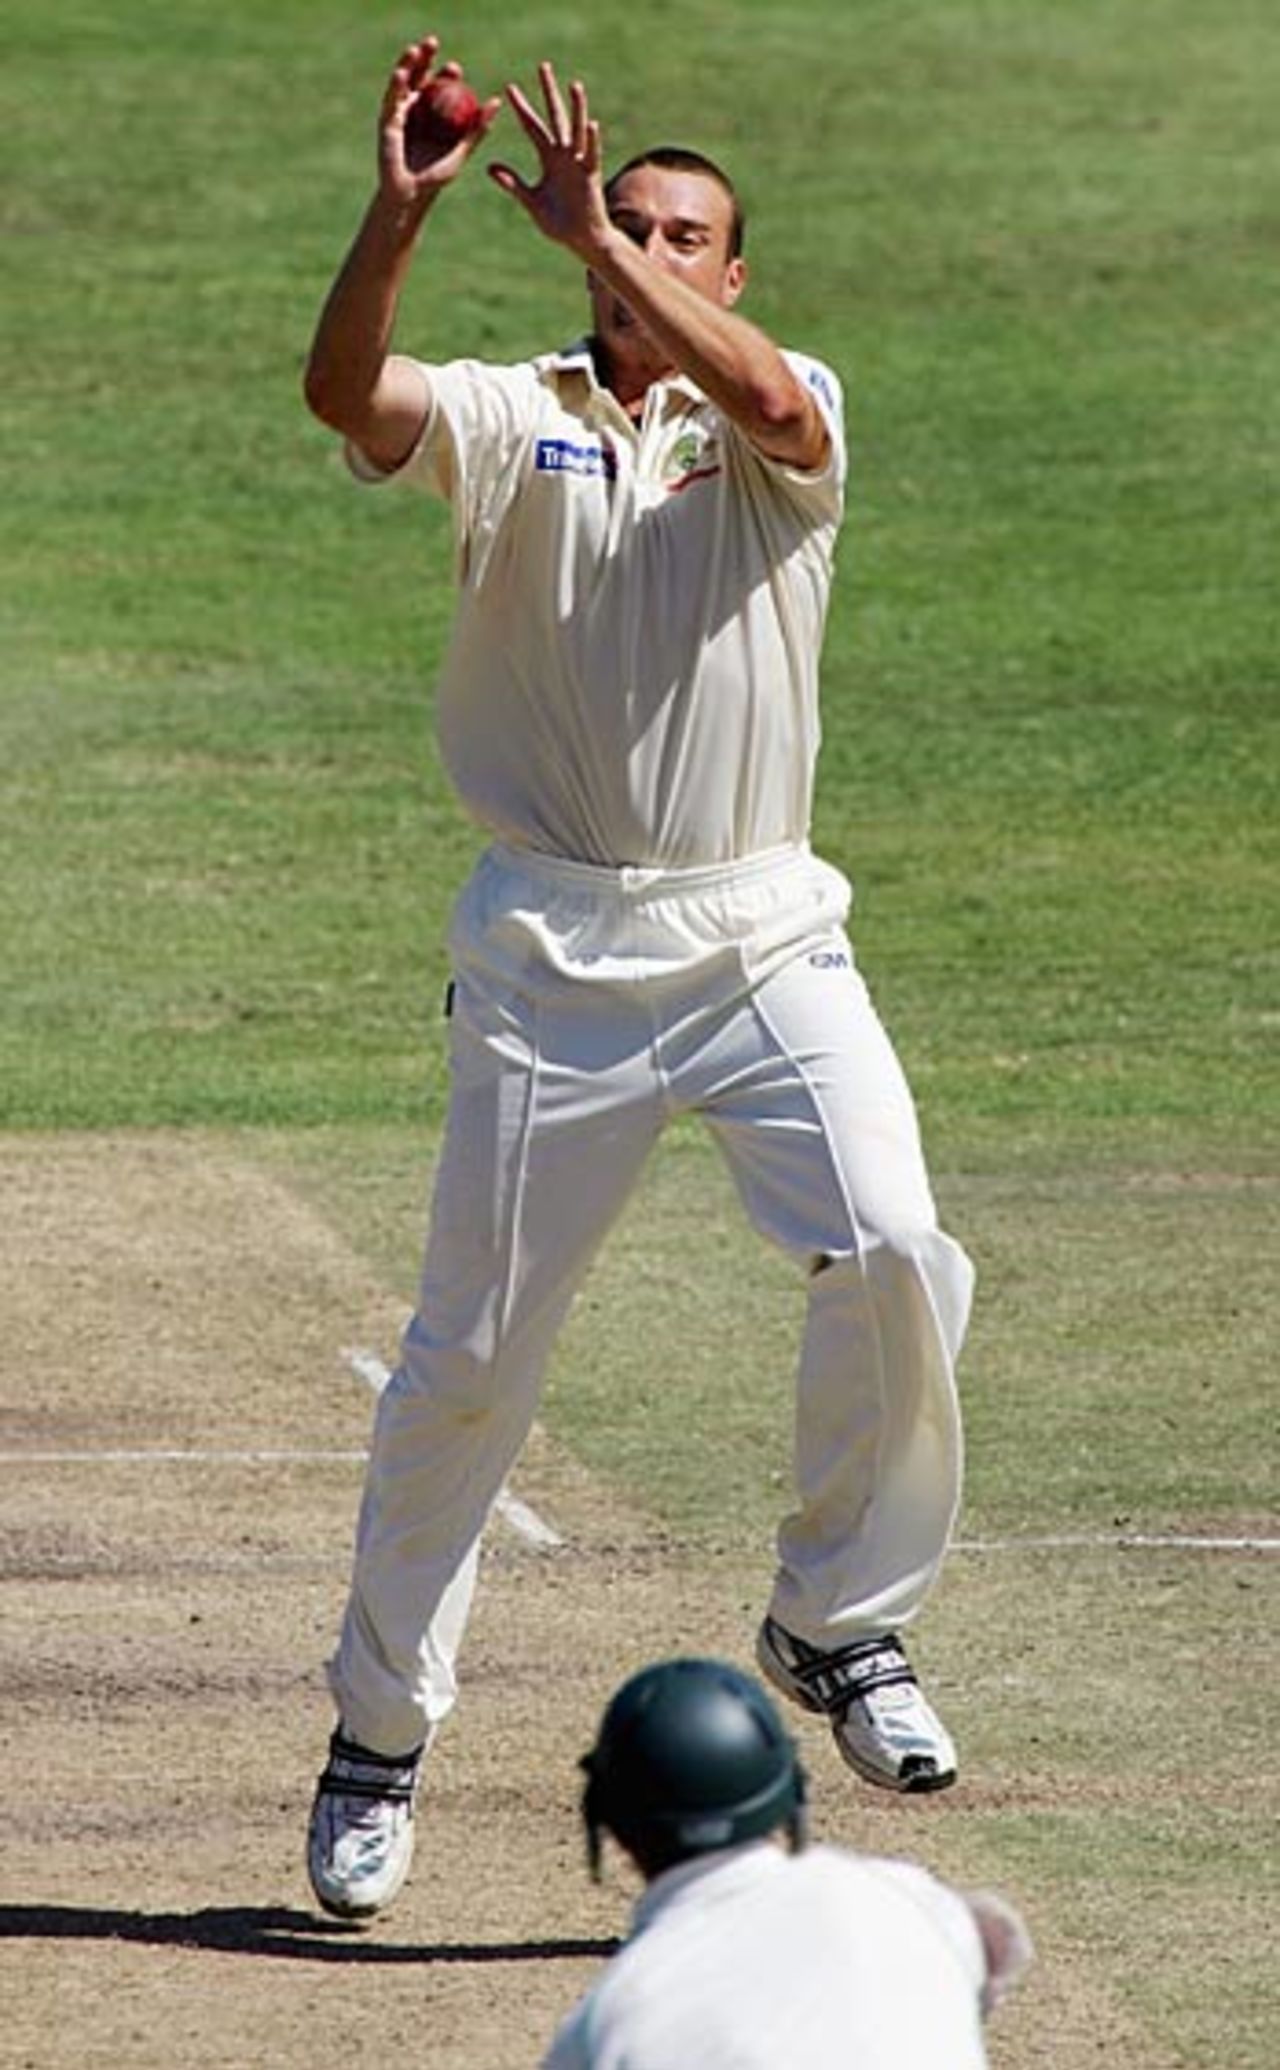 Stuart Clark clings onto a caught and bowled chance to remove Nicky Boje, his eighth wicket on debut, South Africa v Australia, 1st Test, Cape Town, March 18, 2006